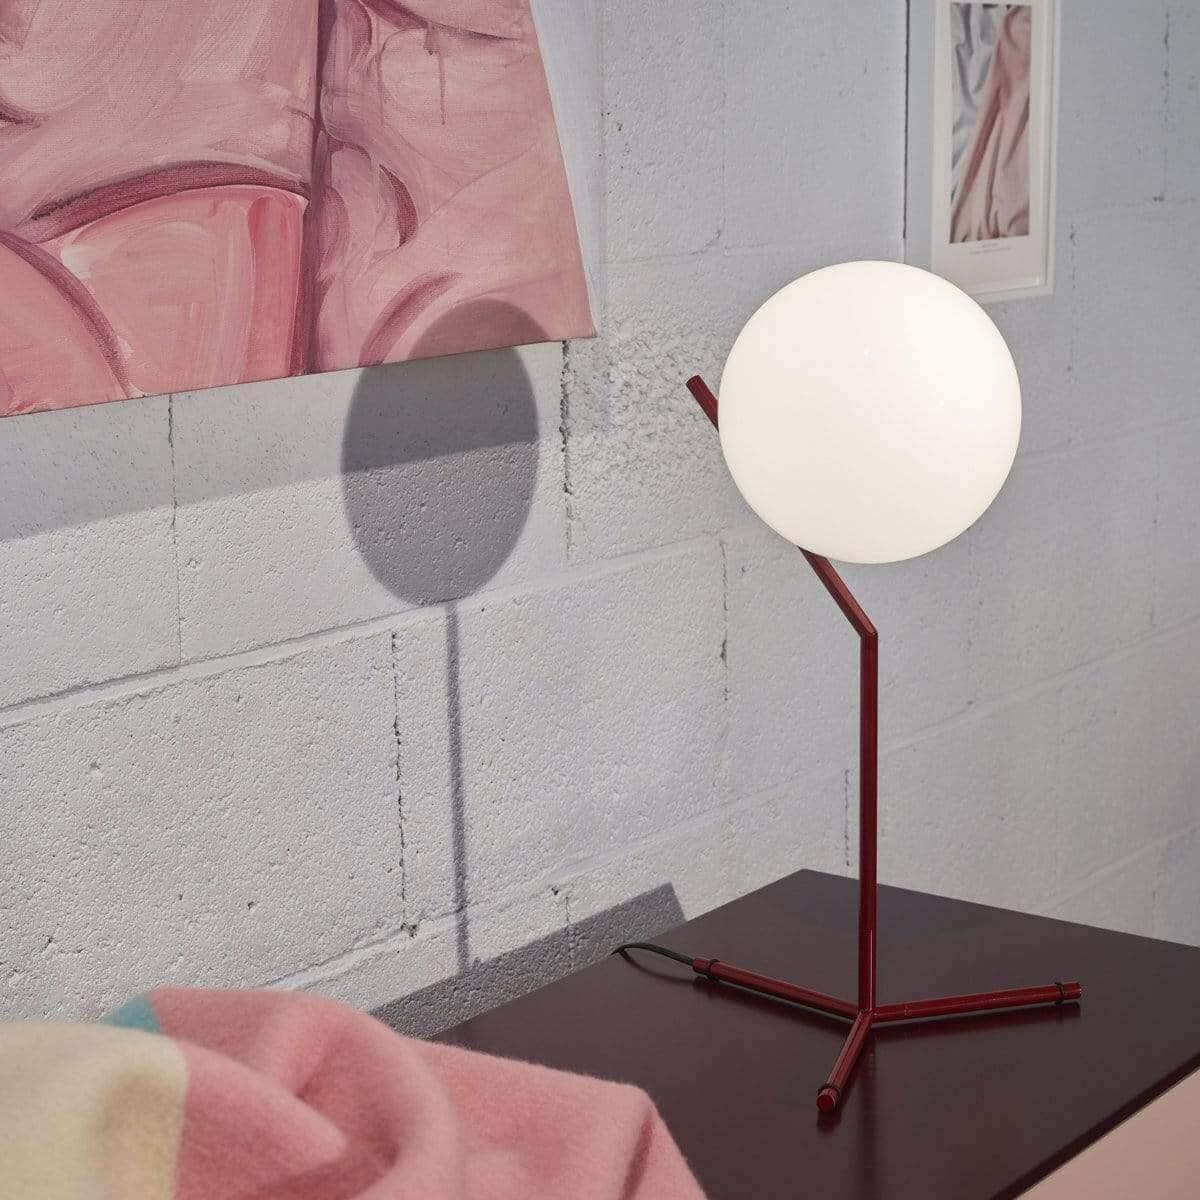 IC Lights Table - T1 High - Curated - Lighting - Flos